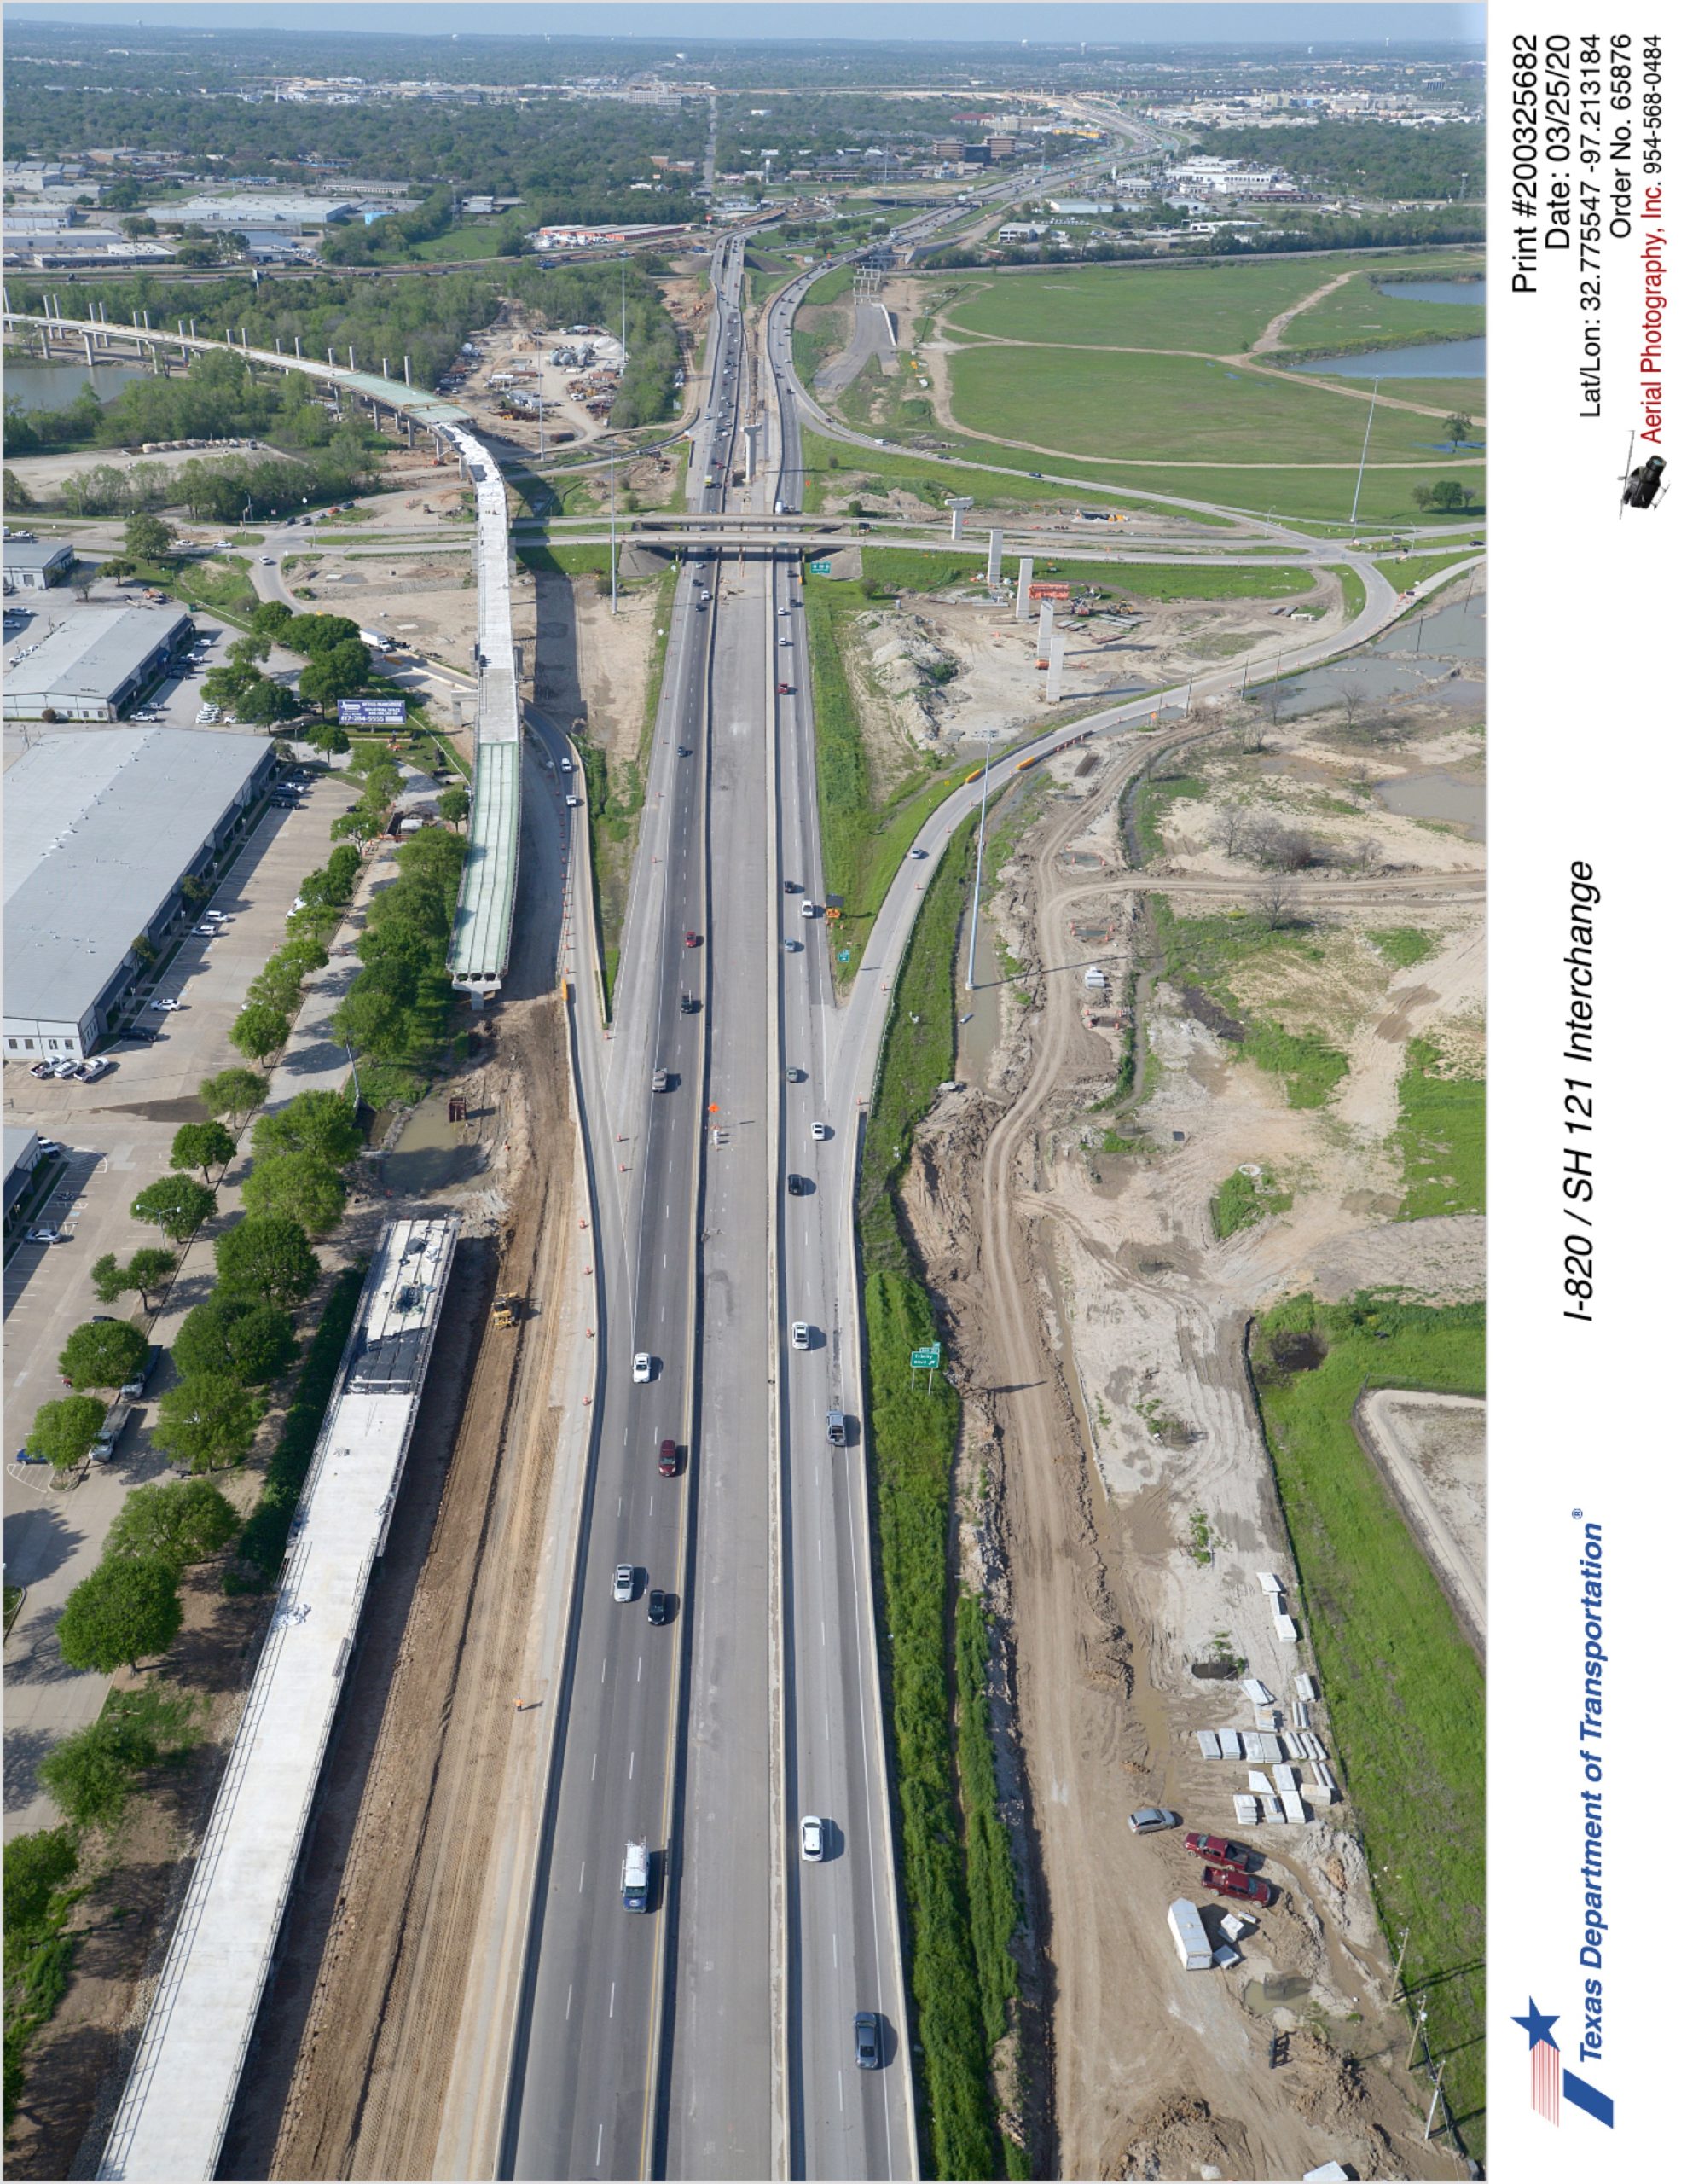 I-820 looking north with Trinity Blvd interchange in background. Construction of SH 121 direct connector ramp and new southbound mainlanes shown on west side.